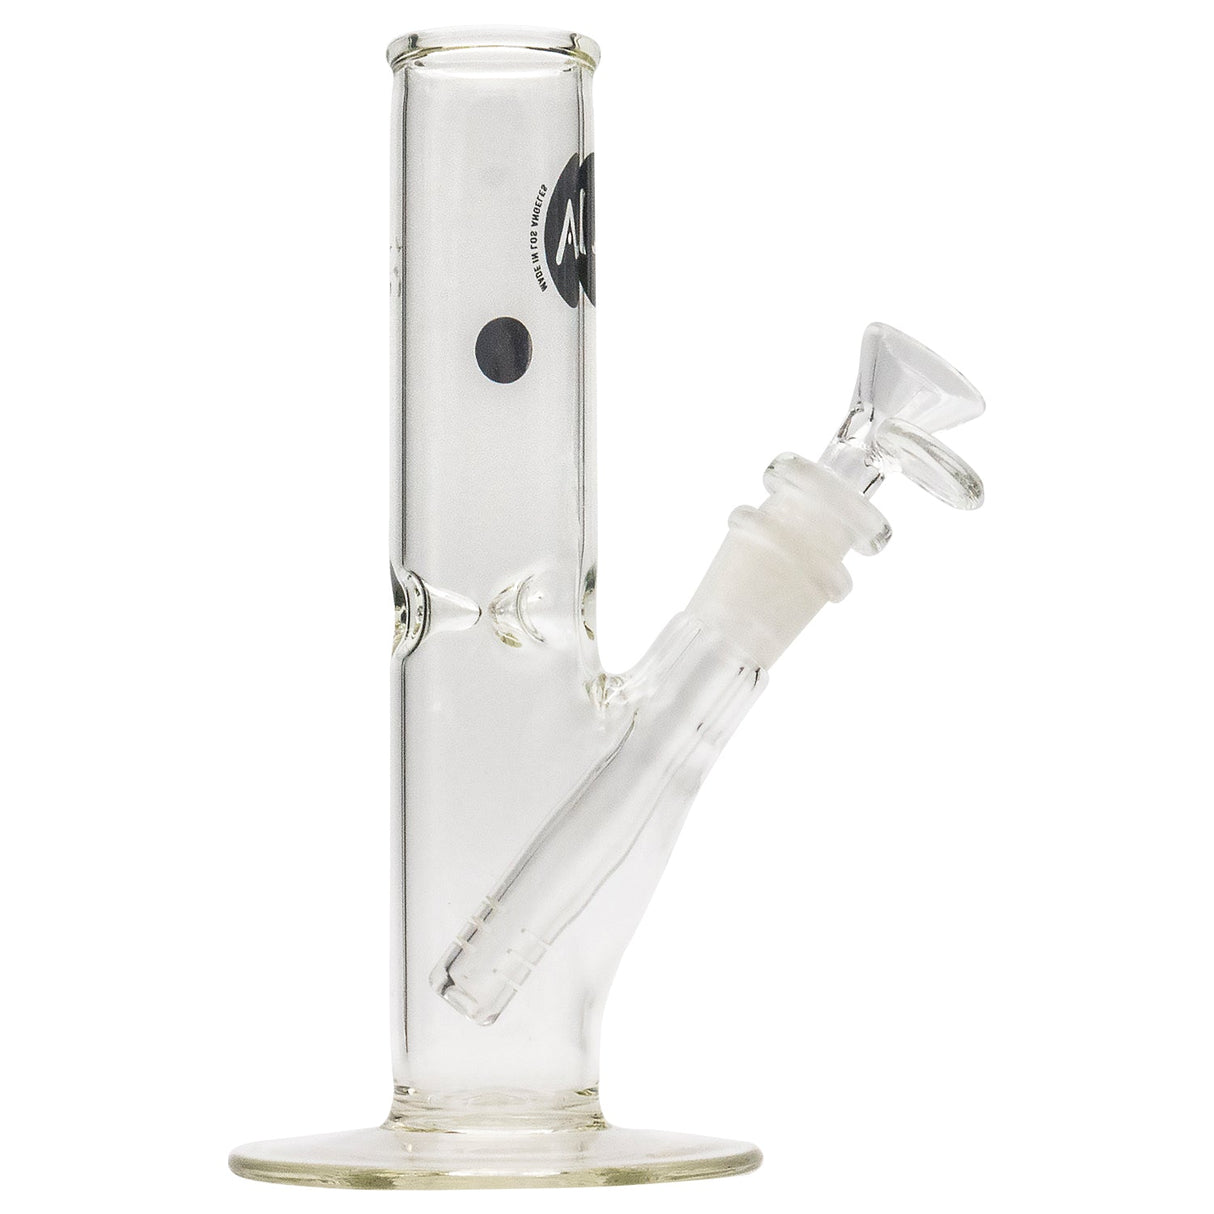 LA Pipes 8" Straight Bong with Ice Pinch, 45 Degree Joint, Front View on Seamless White